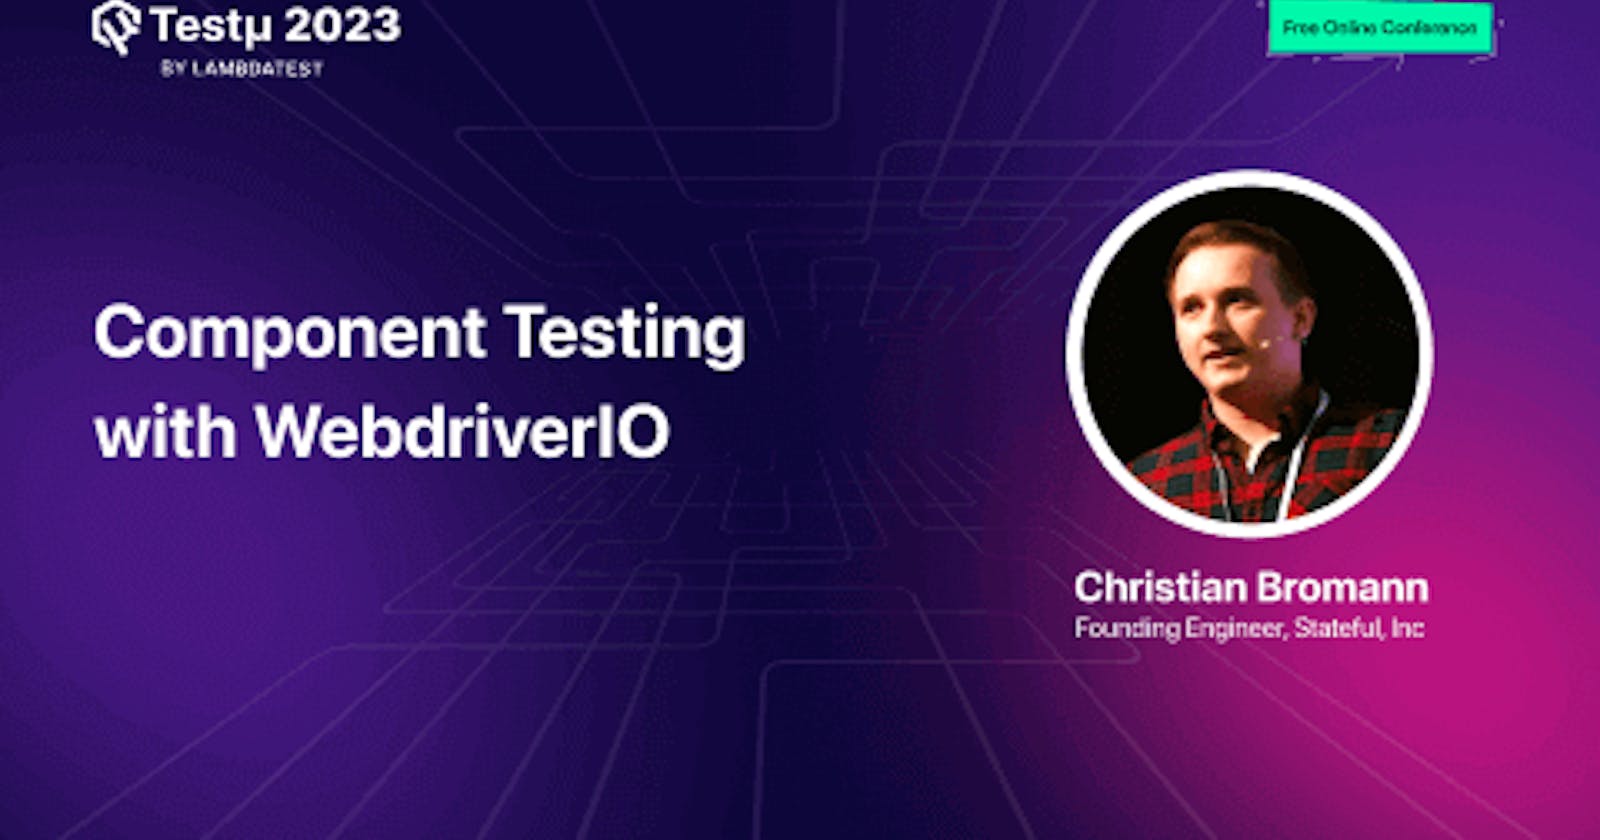 Component Testing with WebdriverIO [Testμ 2023]